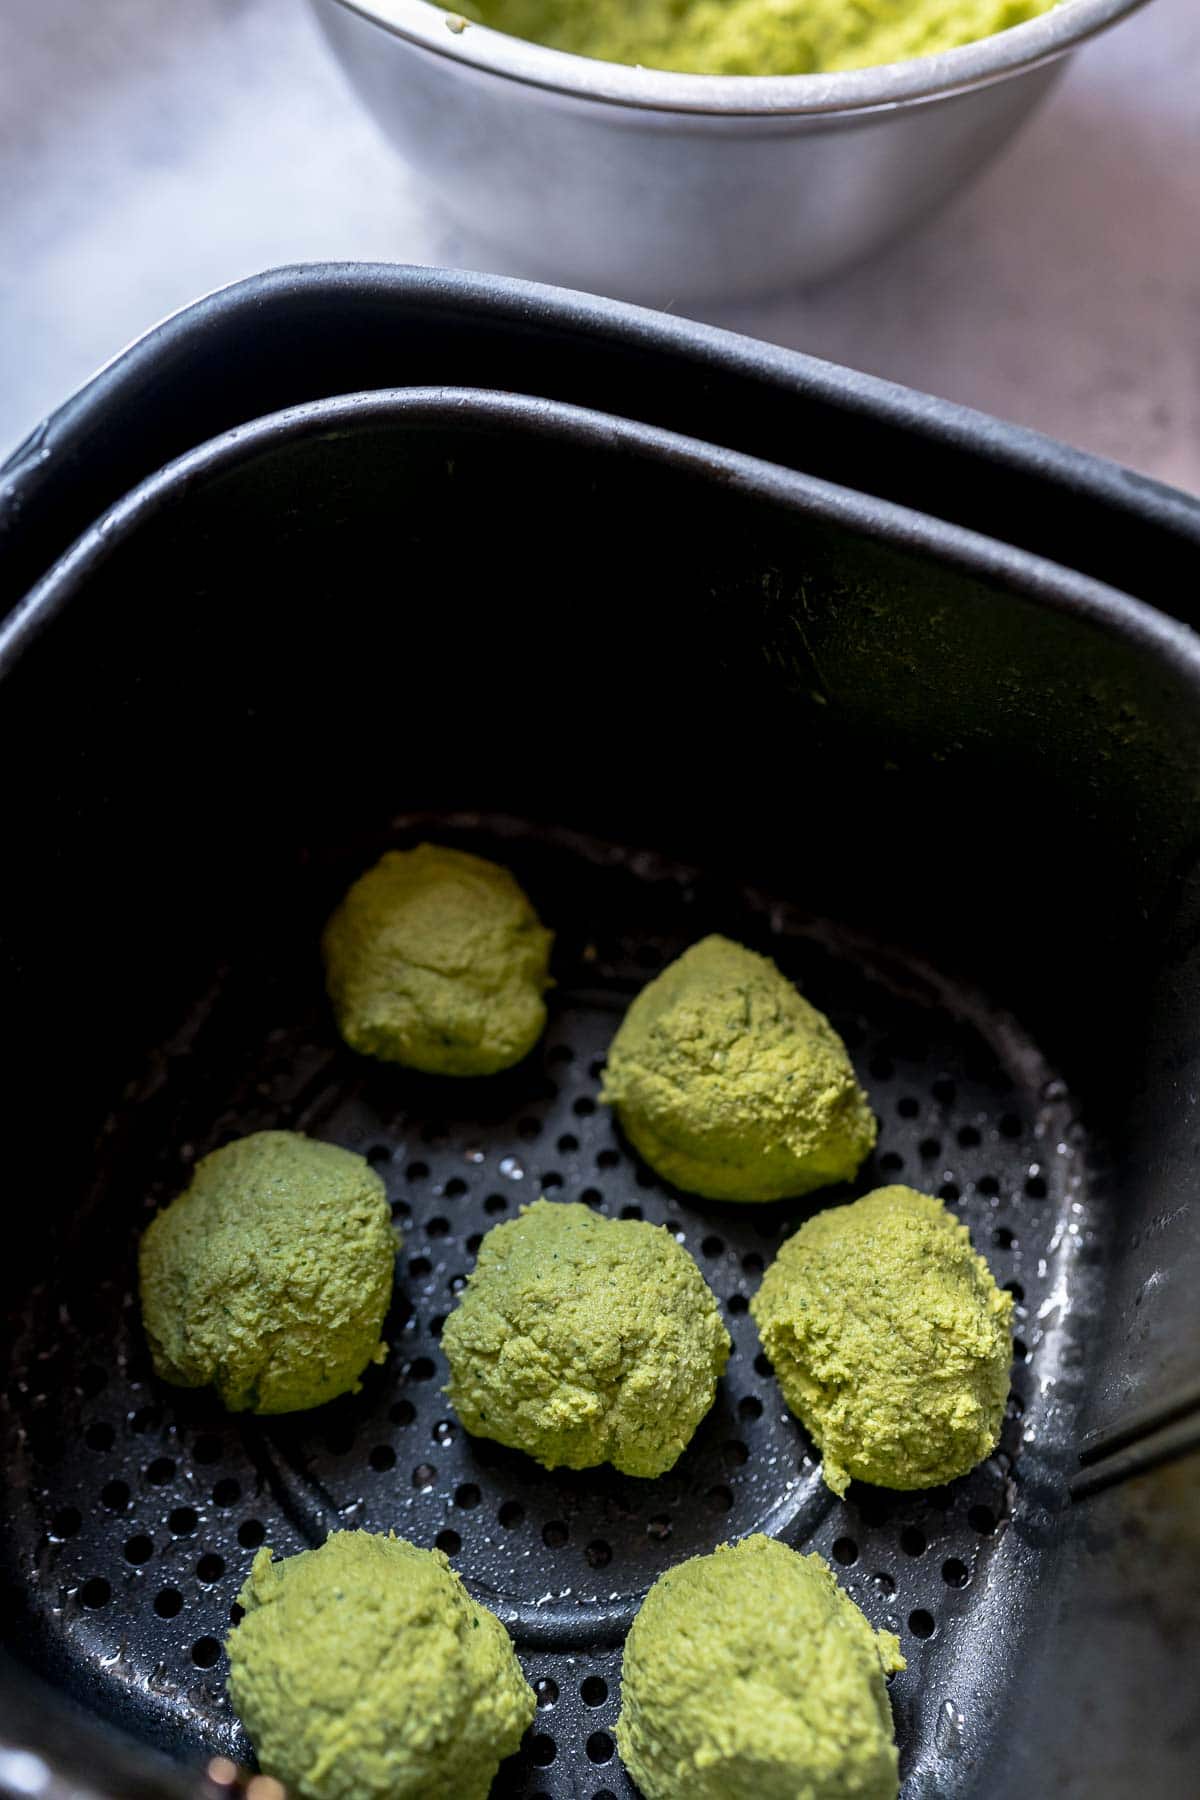 A greased air fryer basket filled with uncooked green falafel balls.